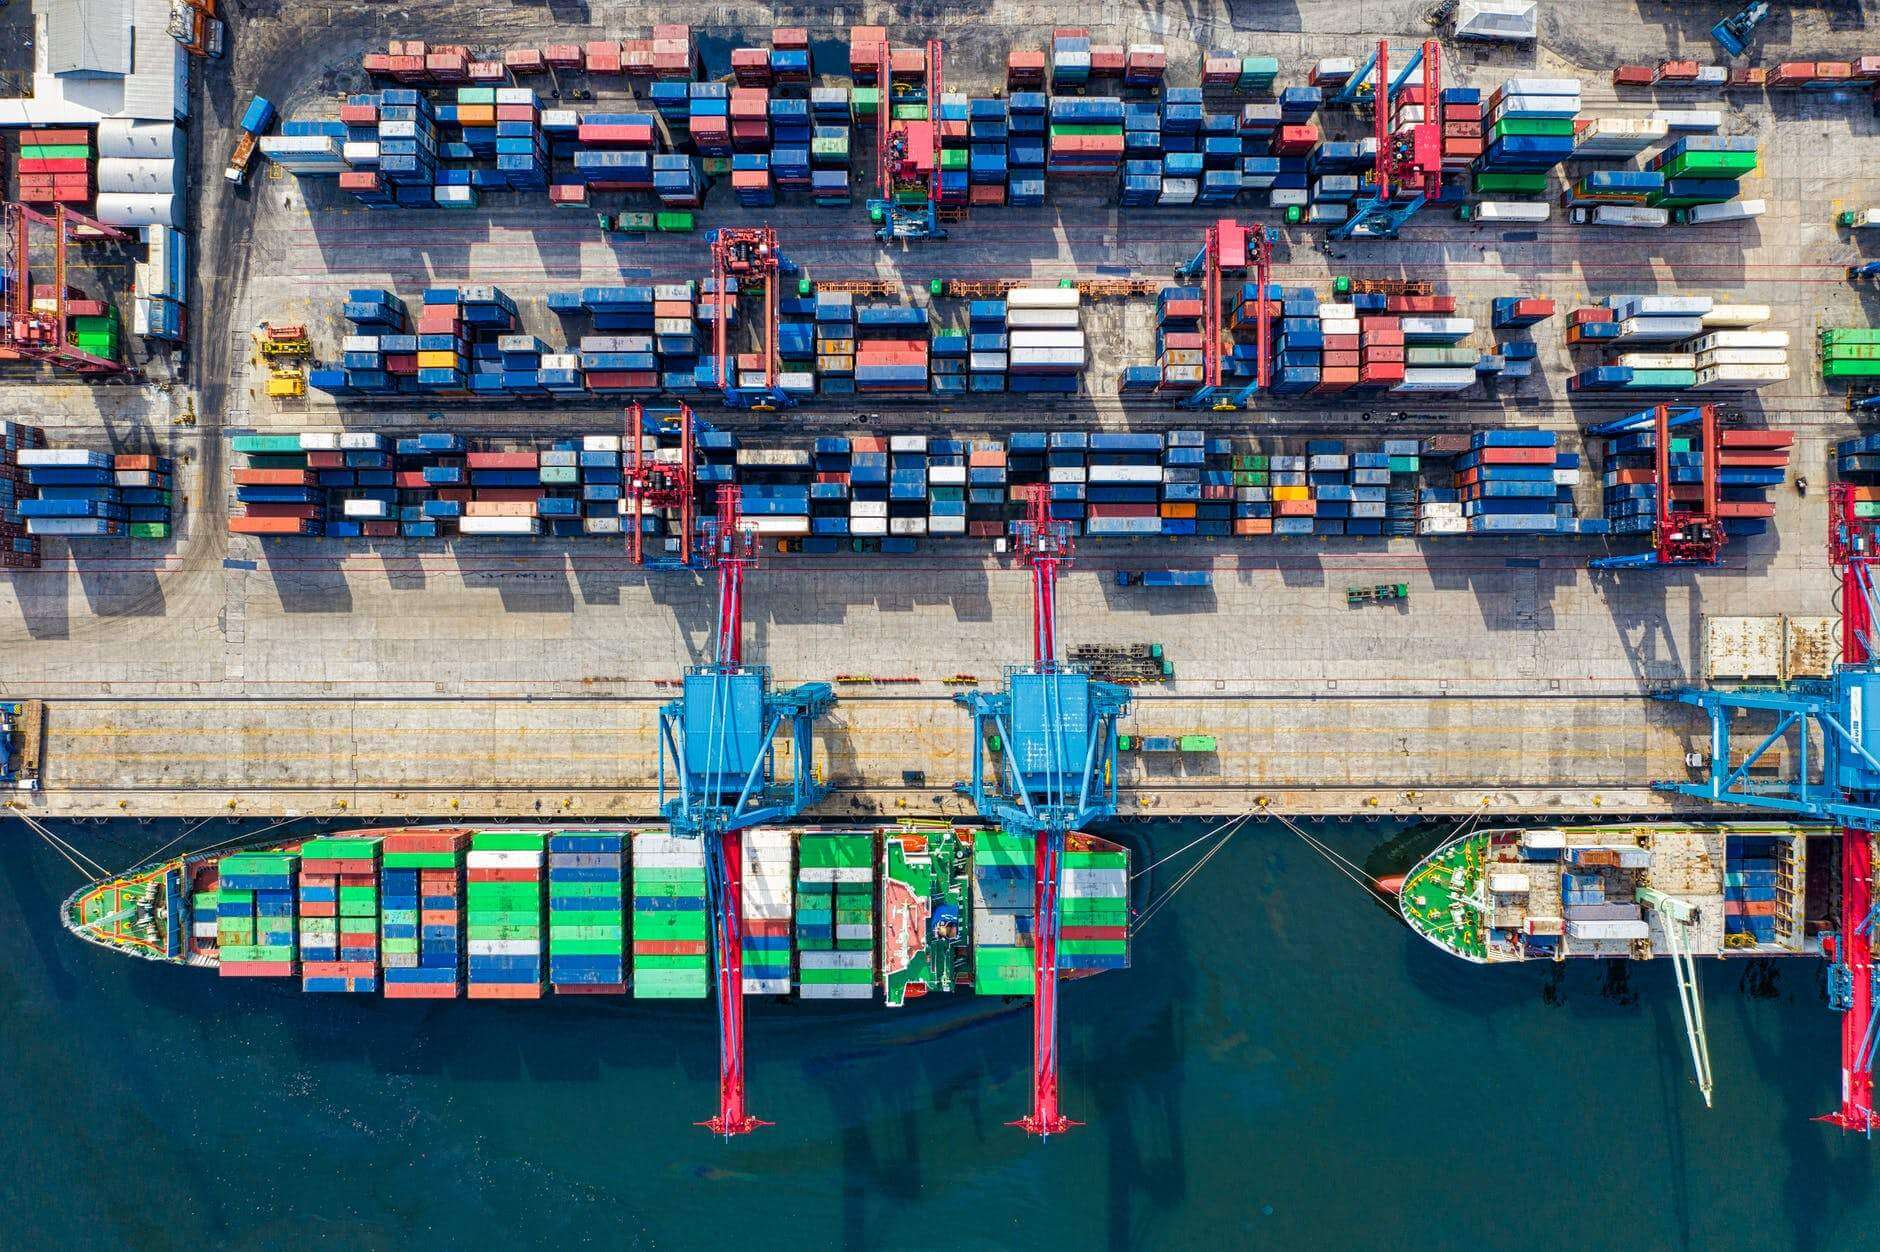 birds eye view photo of freight containers